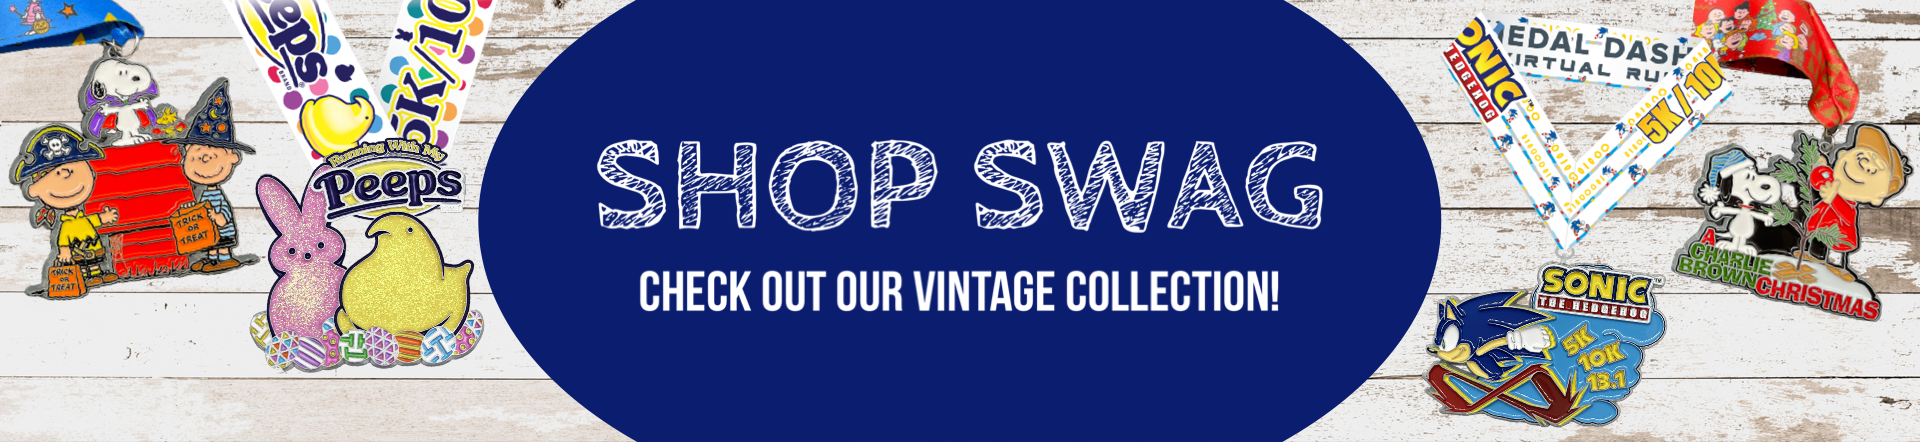 shop swag - check out our vintage collection